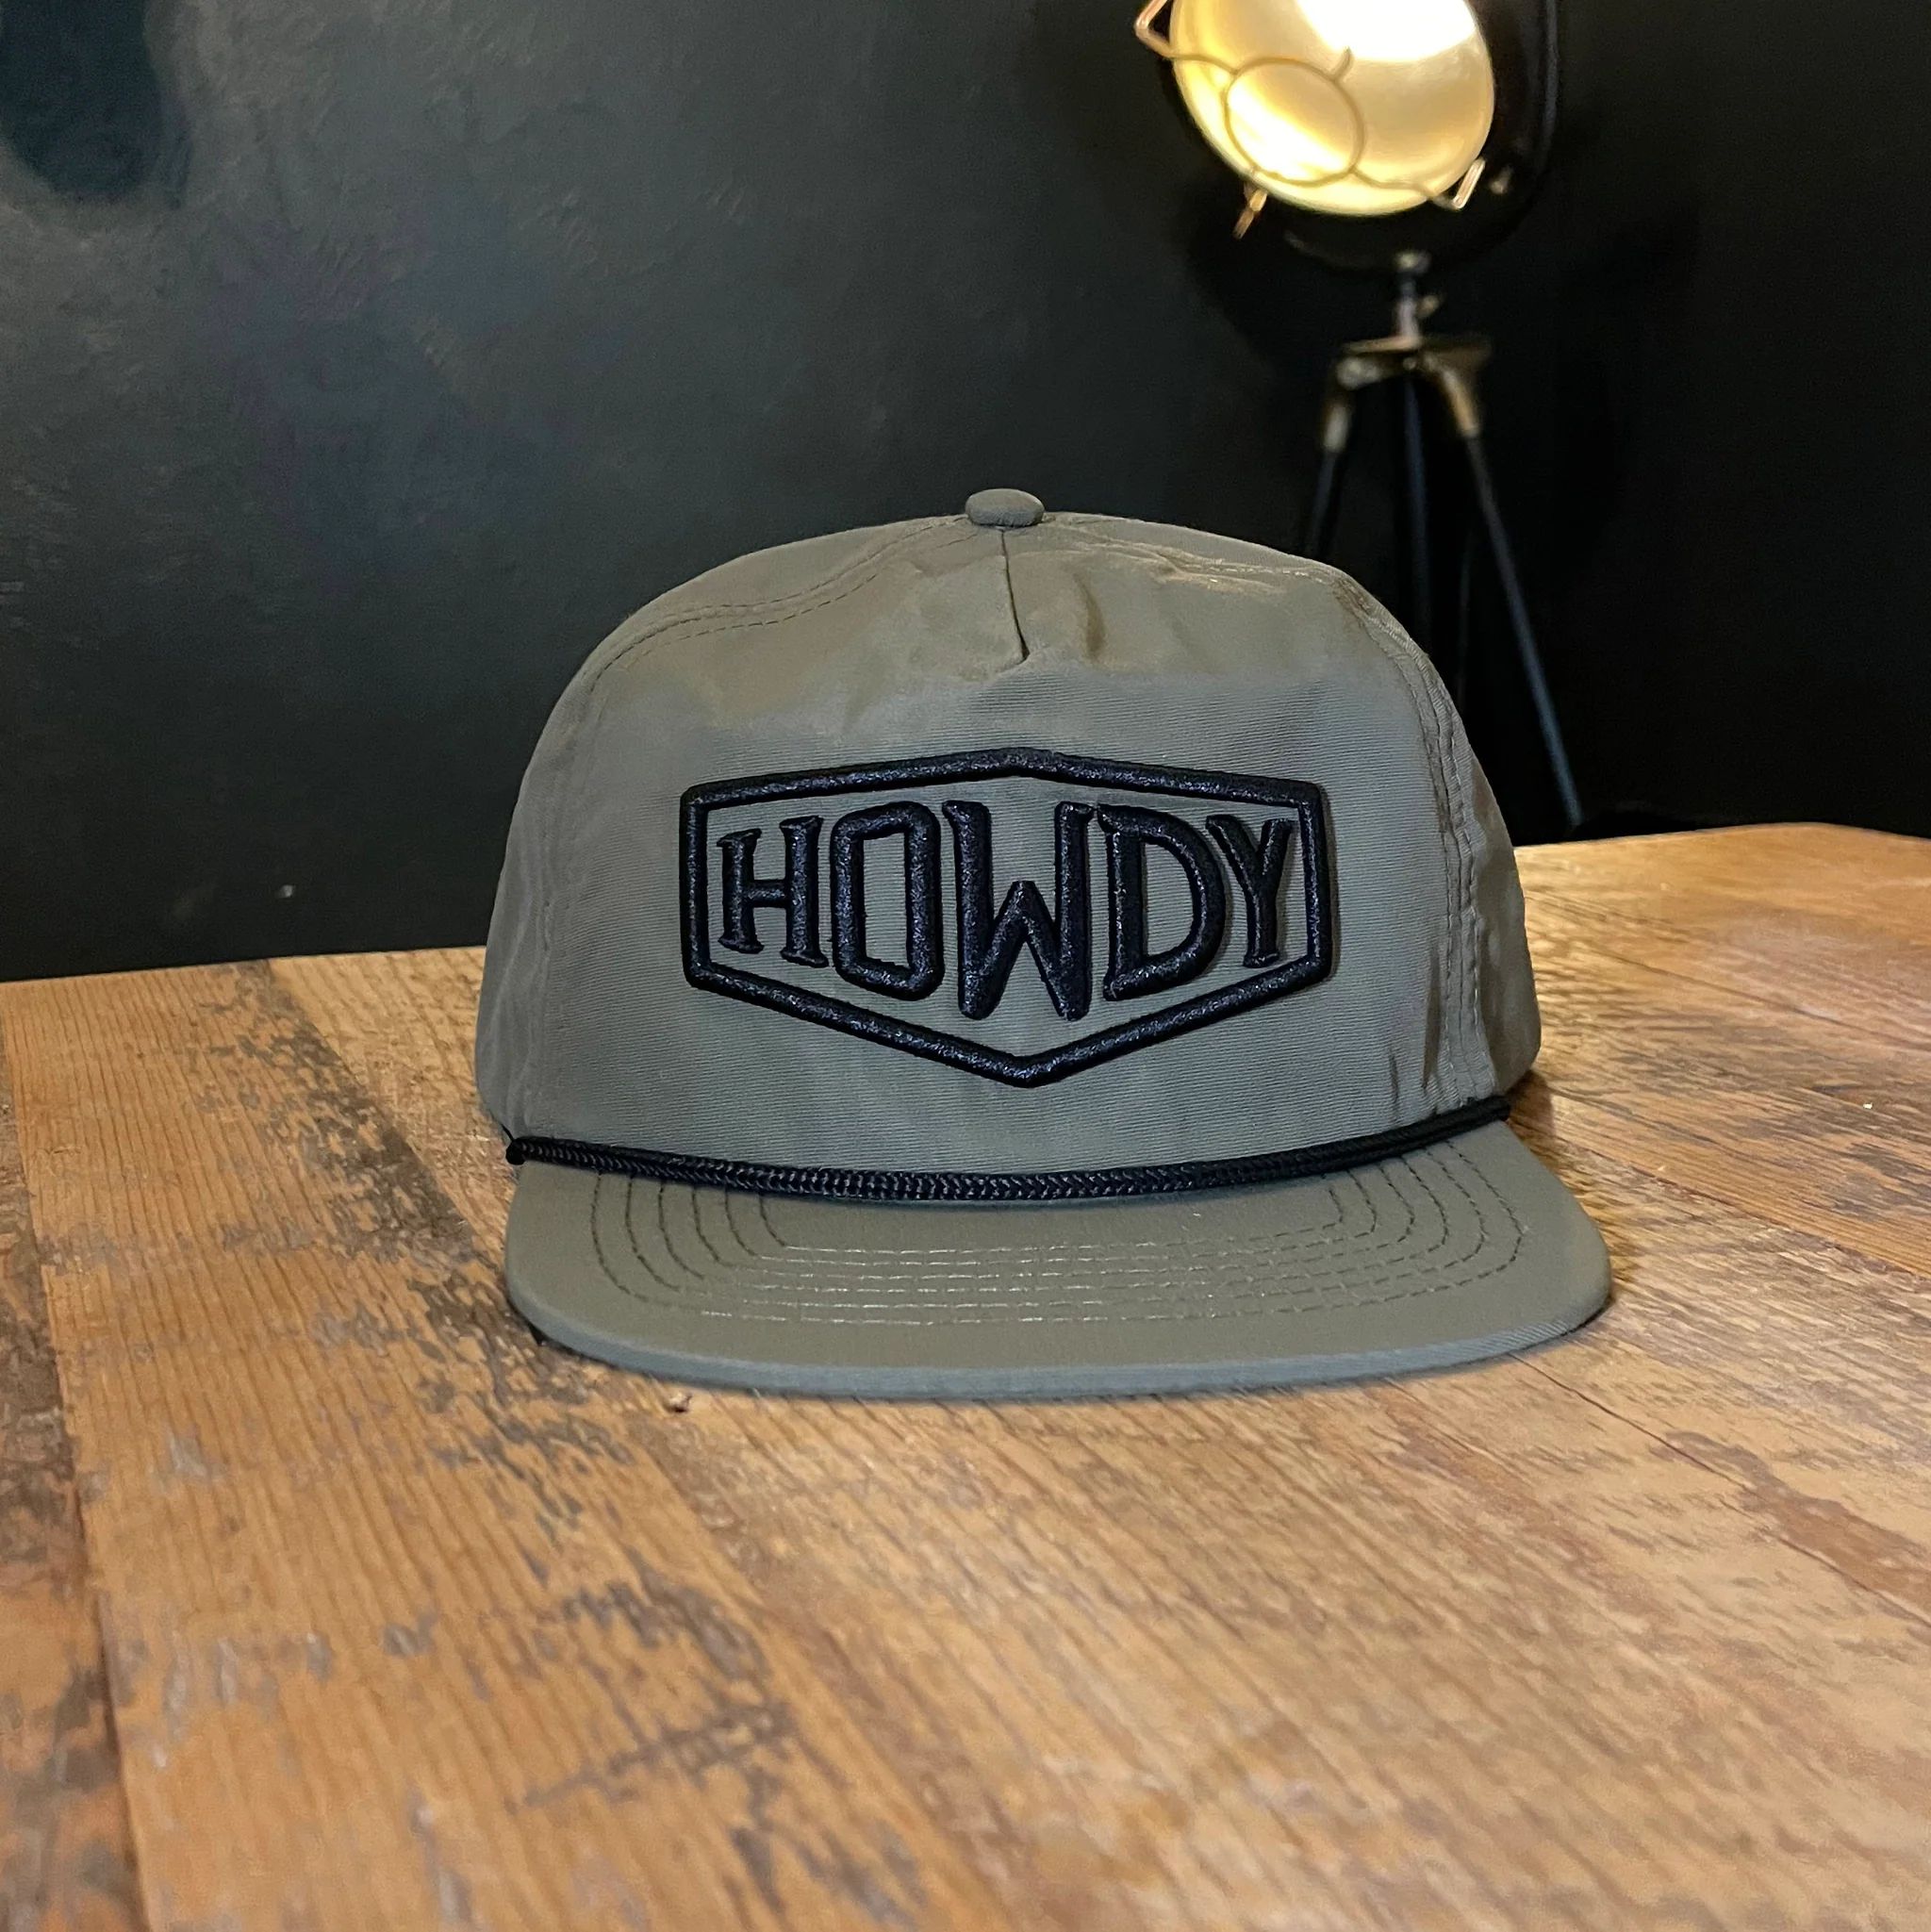 Howdy Embroidered Diamond Badge Rope Hat - Olive Drab | LittleHowdy